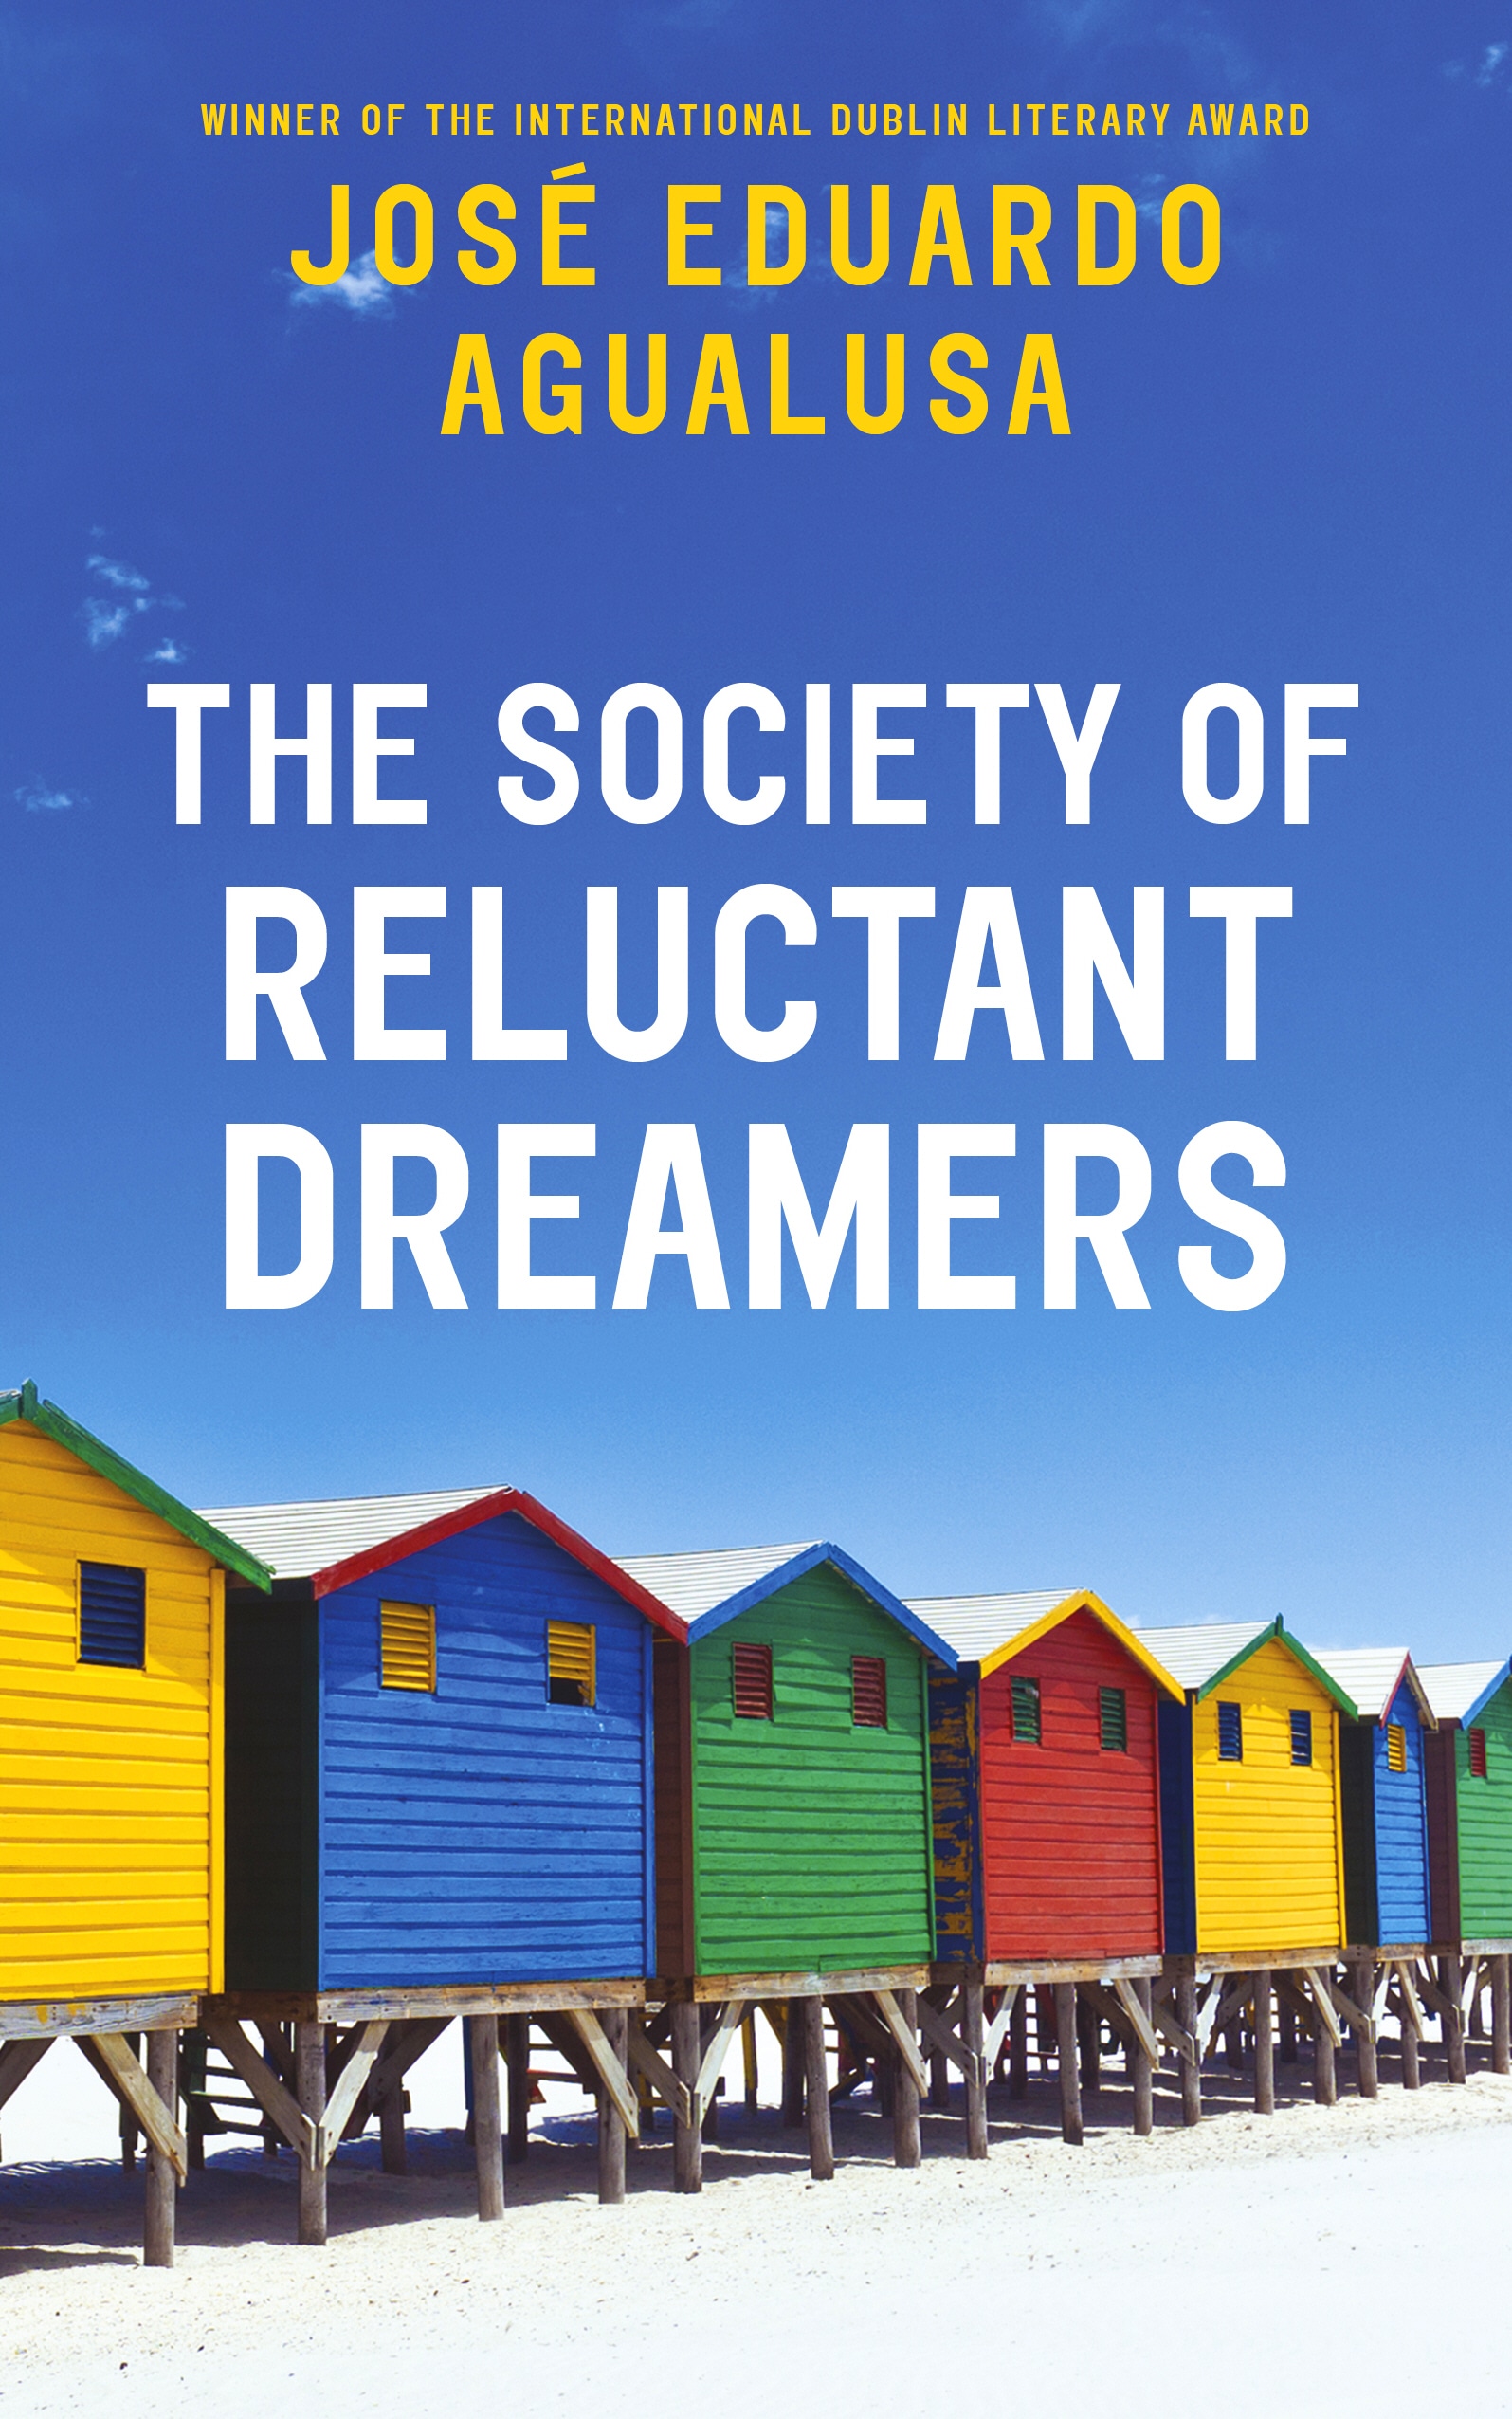 Book “The Society of Reluctant Dreamers” by José Eduardo Agualusa — August 29, 2019